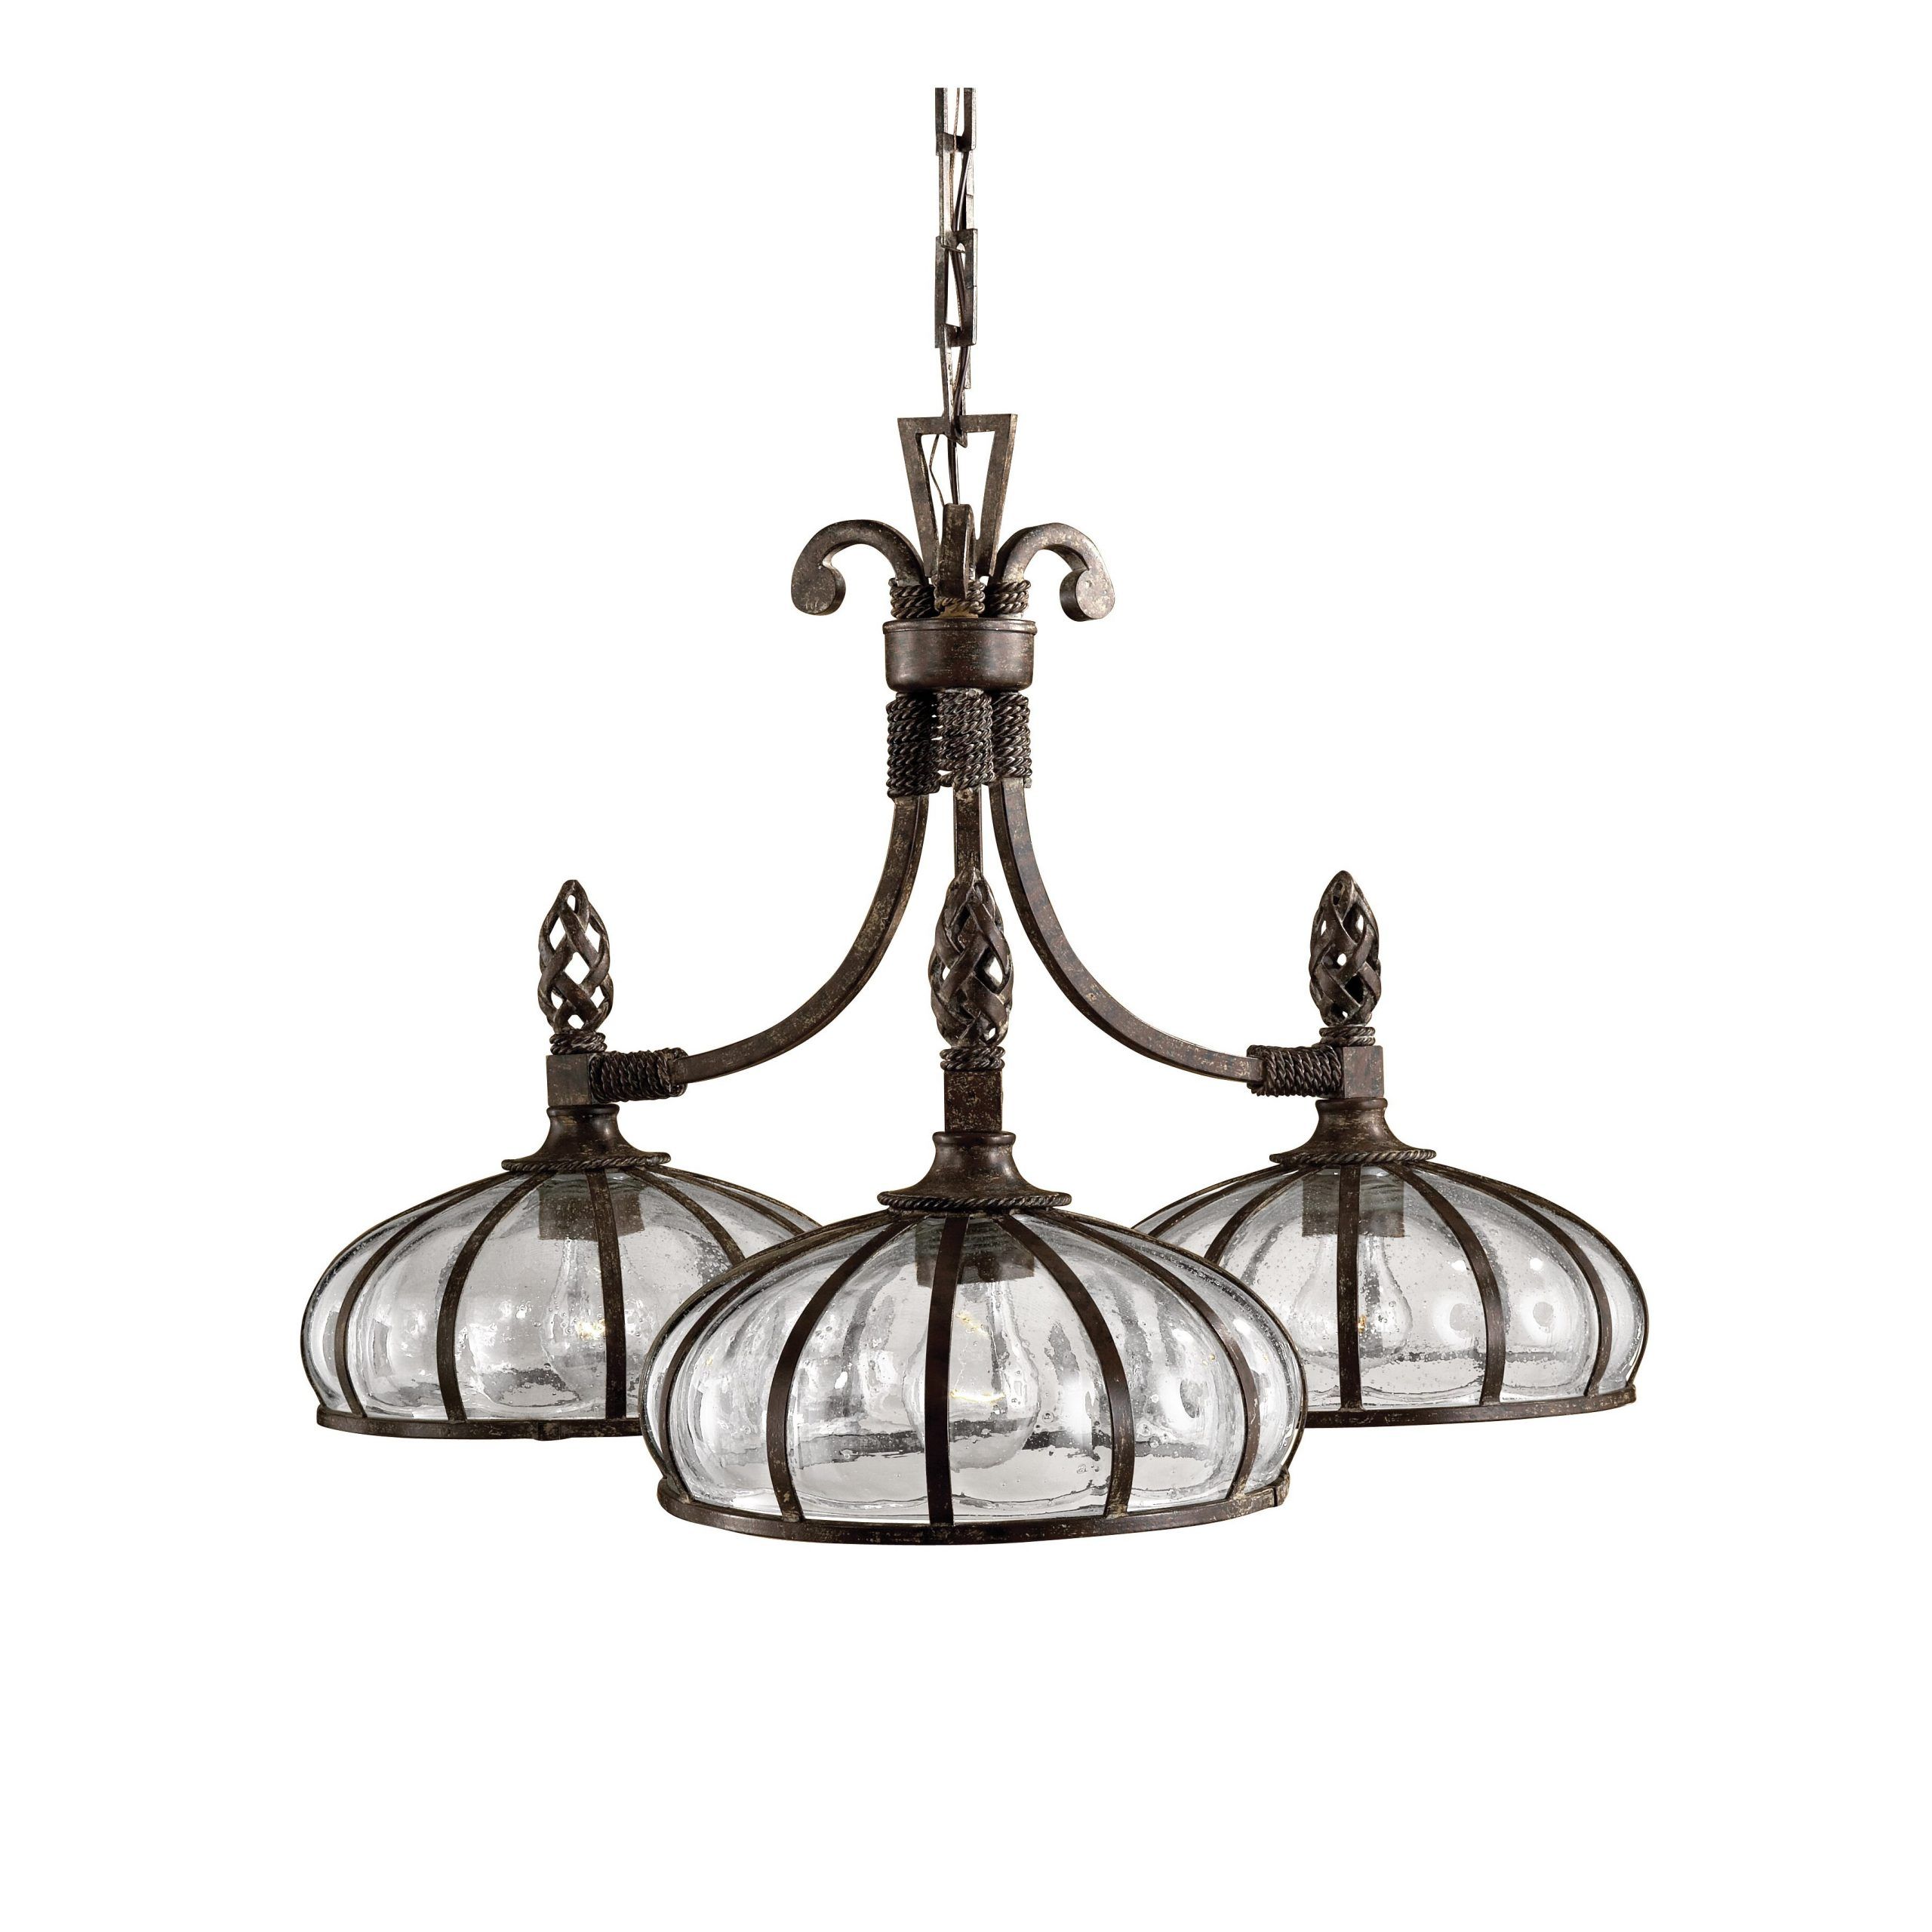 Wayfair Intended For Recent 3 Light Pendant Chandeliers (View 11 of 15)